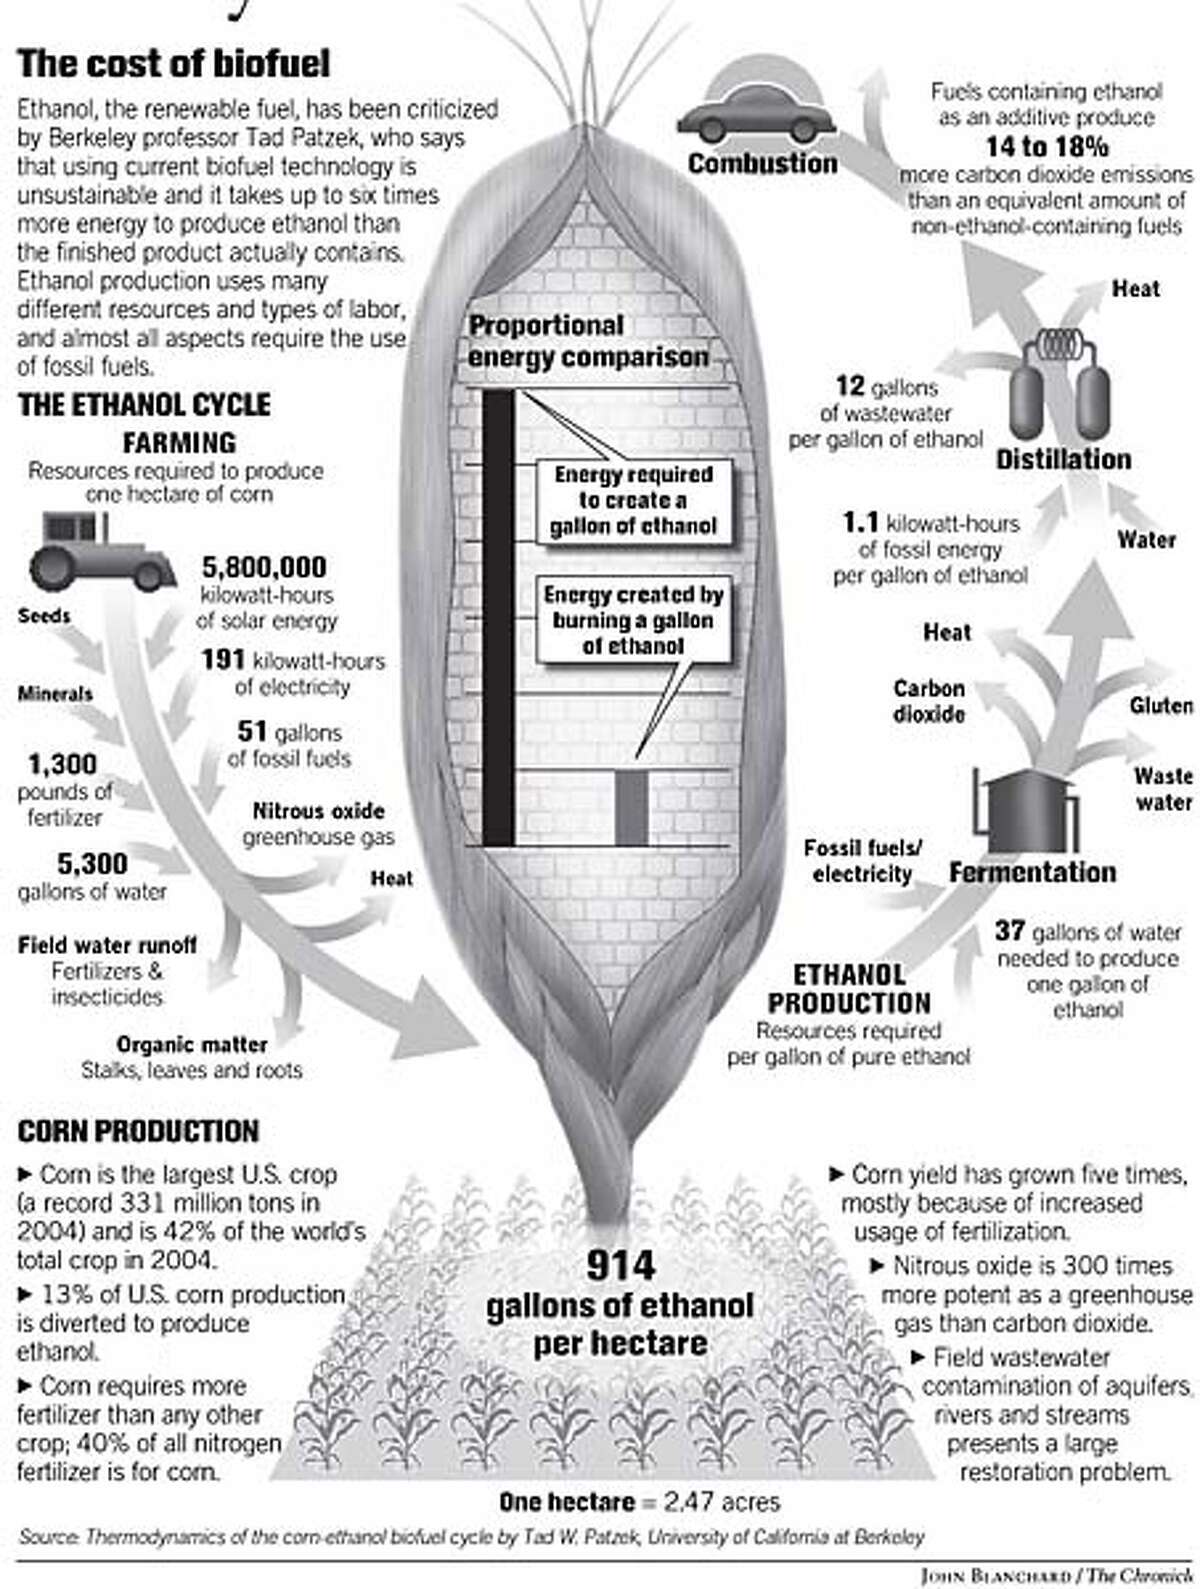 The Cost of Biofuel. Chronicle graphic by John Blanchard